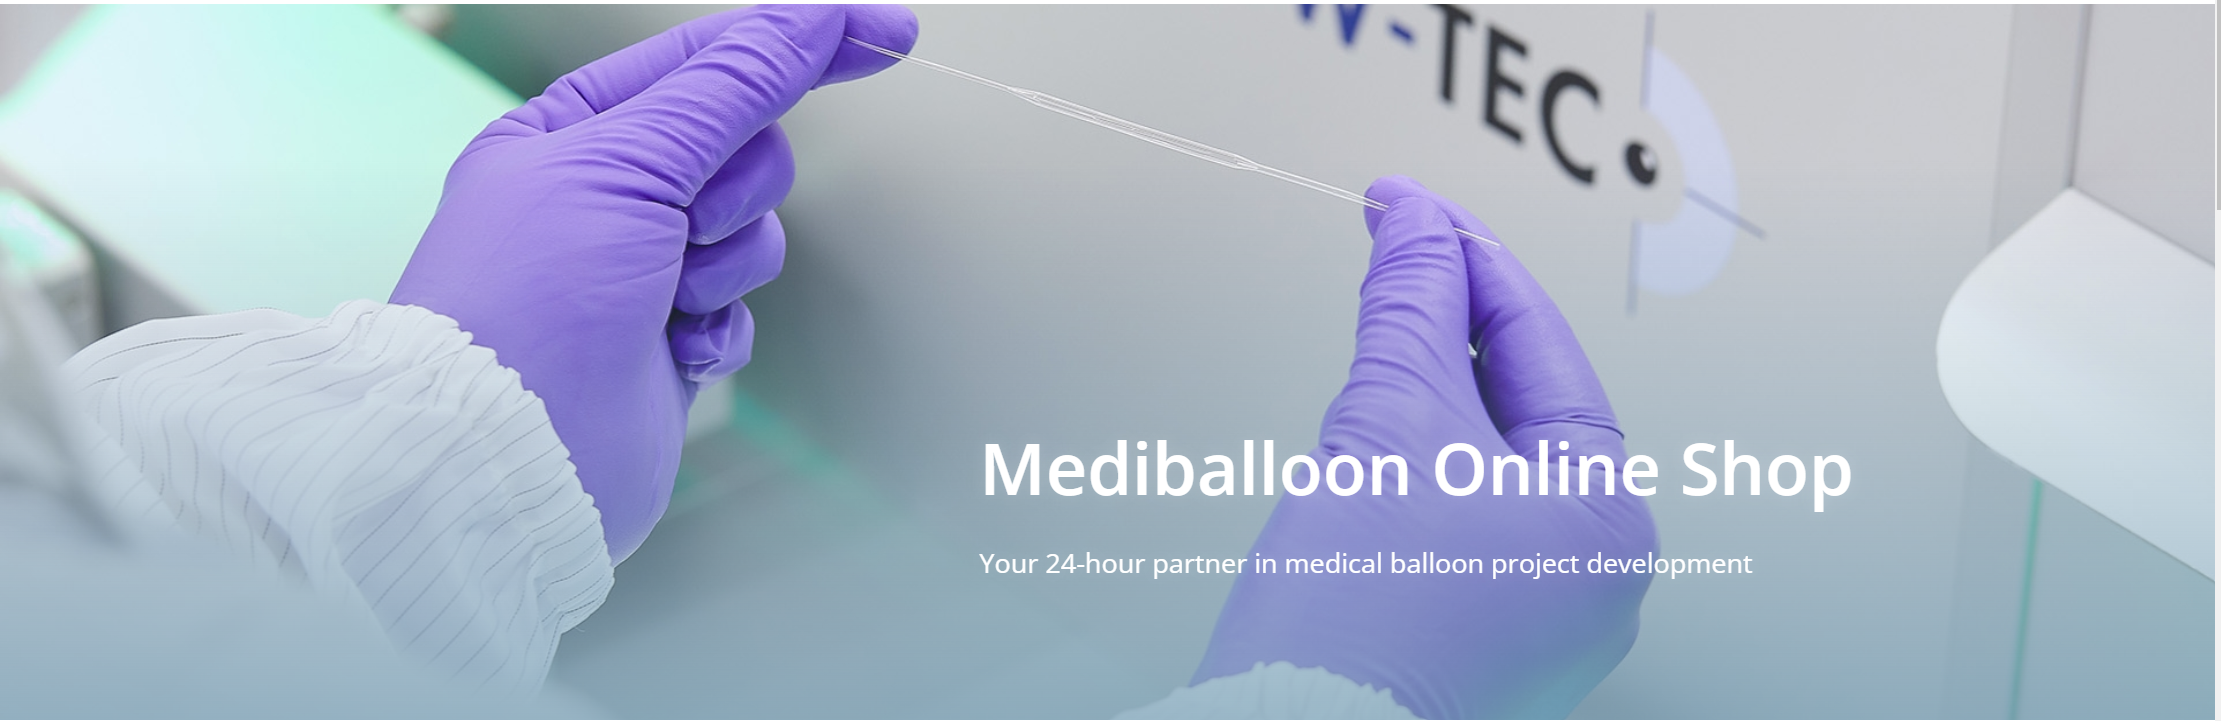 Mediballoon's Online Shop is now live, offering a range of medical balloons and tubing for sale. Mediballoon is your best partner for medical device development.